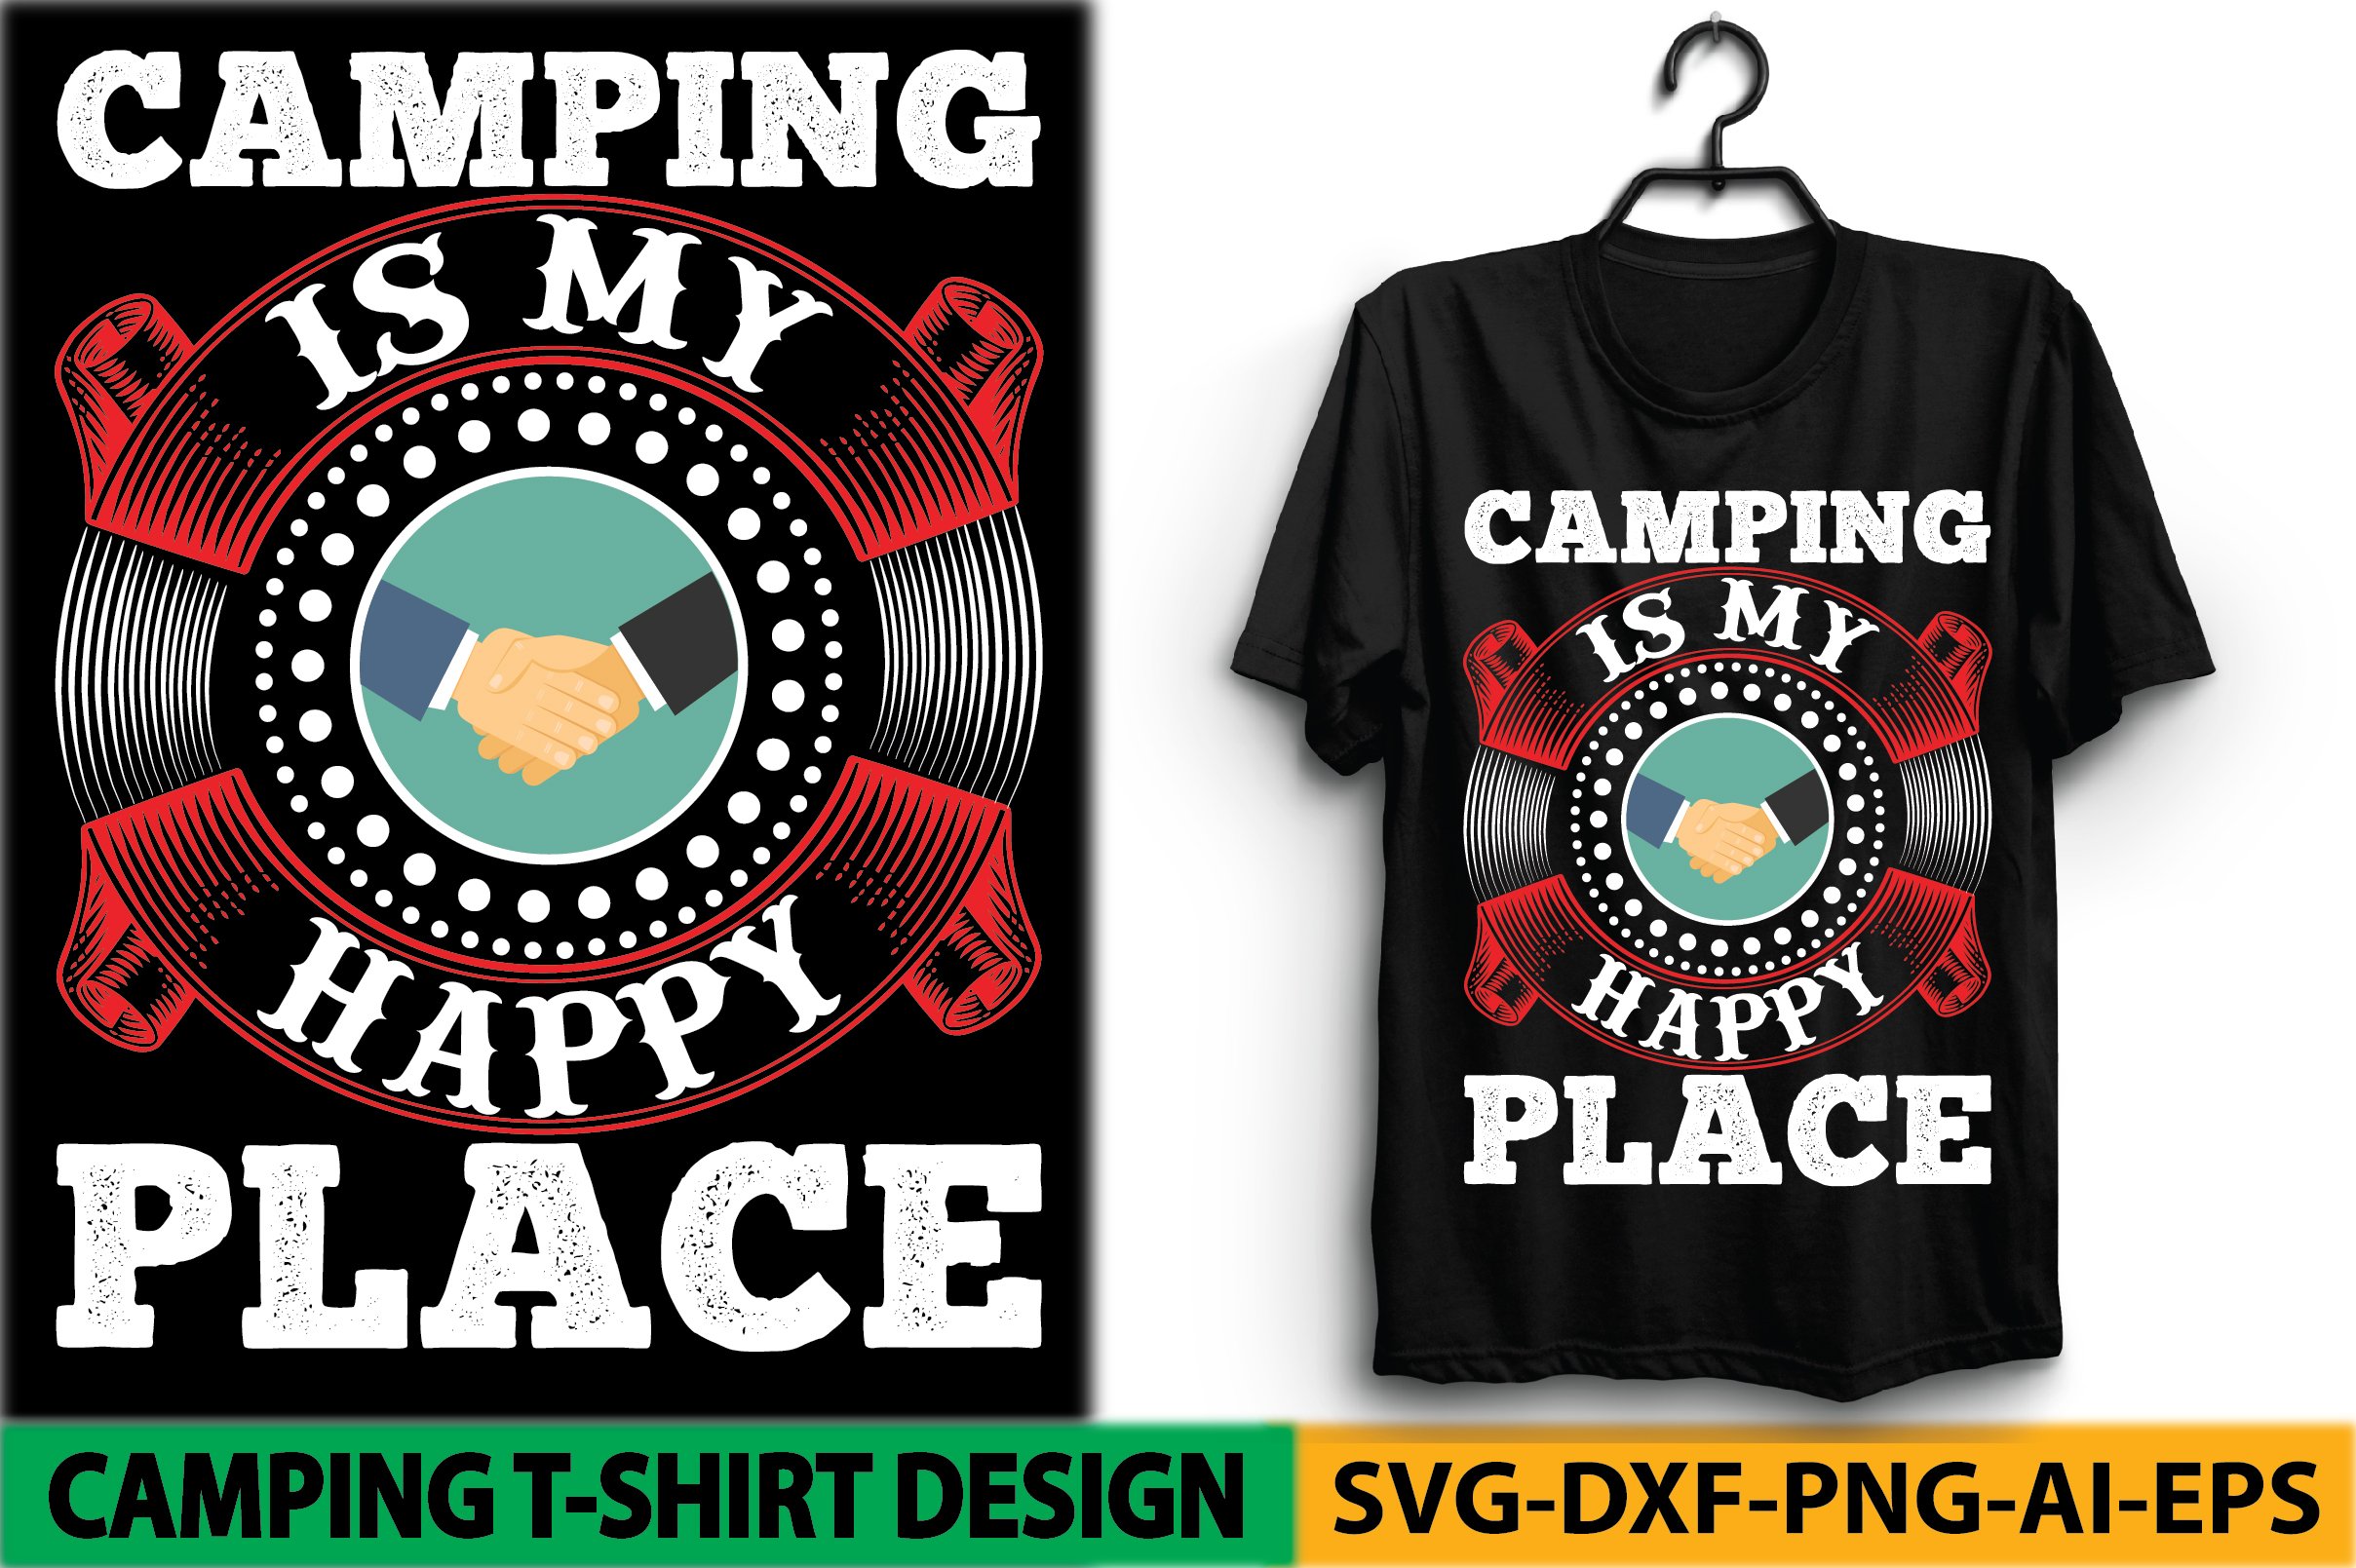 Classic black t-shirt with so colorful camping illustration.